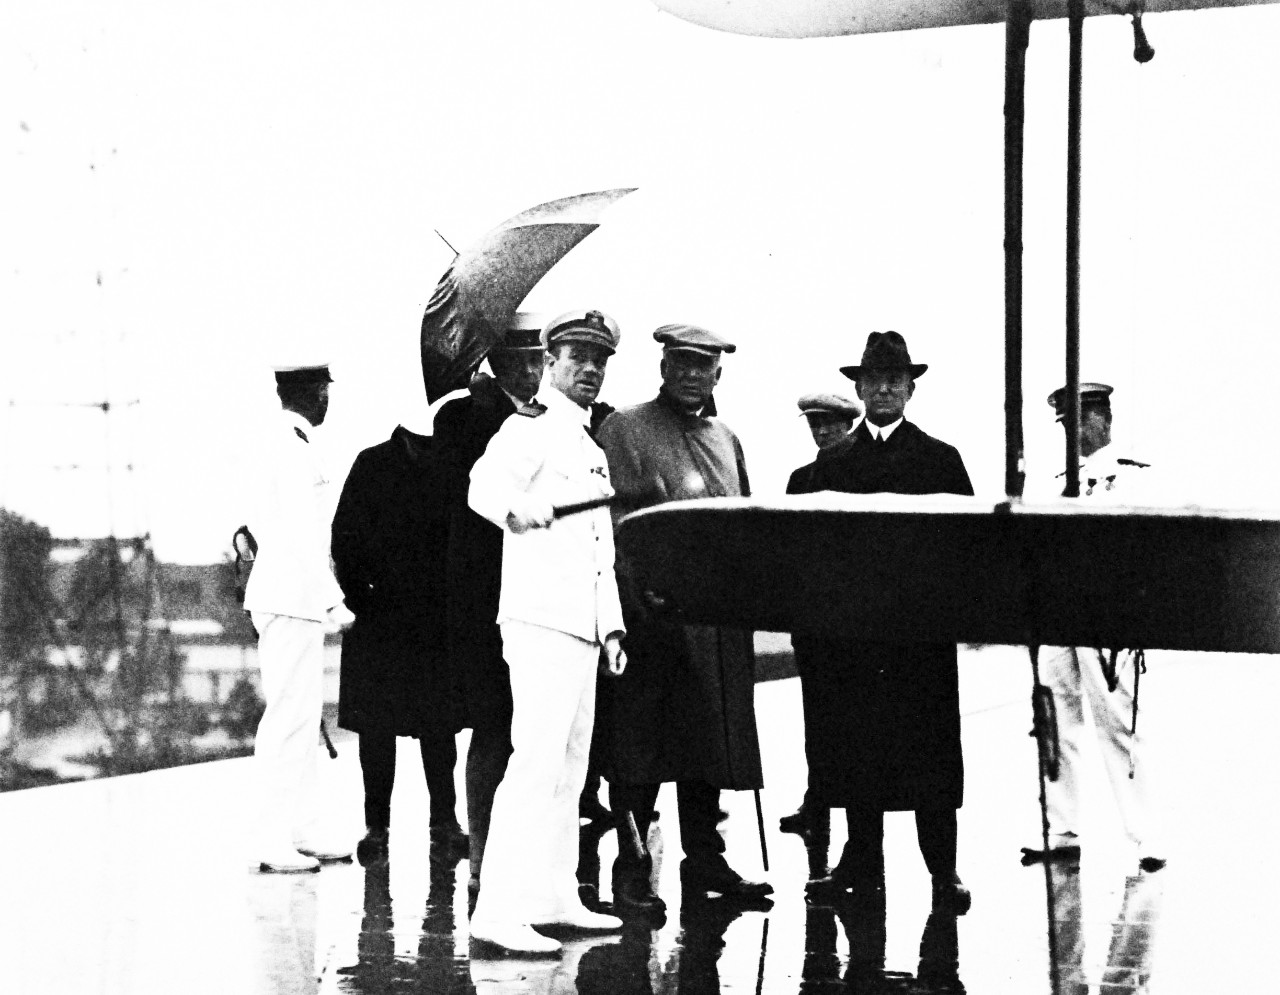 80-G-433311:  USS Langley (CV-1), 1922-23.  President Warren G. Harding, with Commander Kenneth Whiting, USN, Secretary of the Interior Hubert Work, and Rear Admiral William A. Moffett, USN, on the flight deck of USS Langley (CV 1), 1922-23.   Photograph received October 2, 1951.   Official U.S. Navy Photograph, now in the collections of the National Archives.  (2016/12/20).